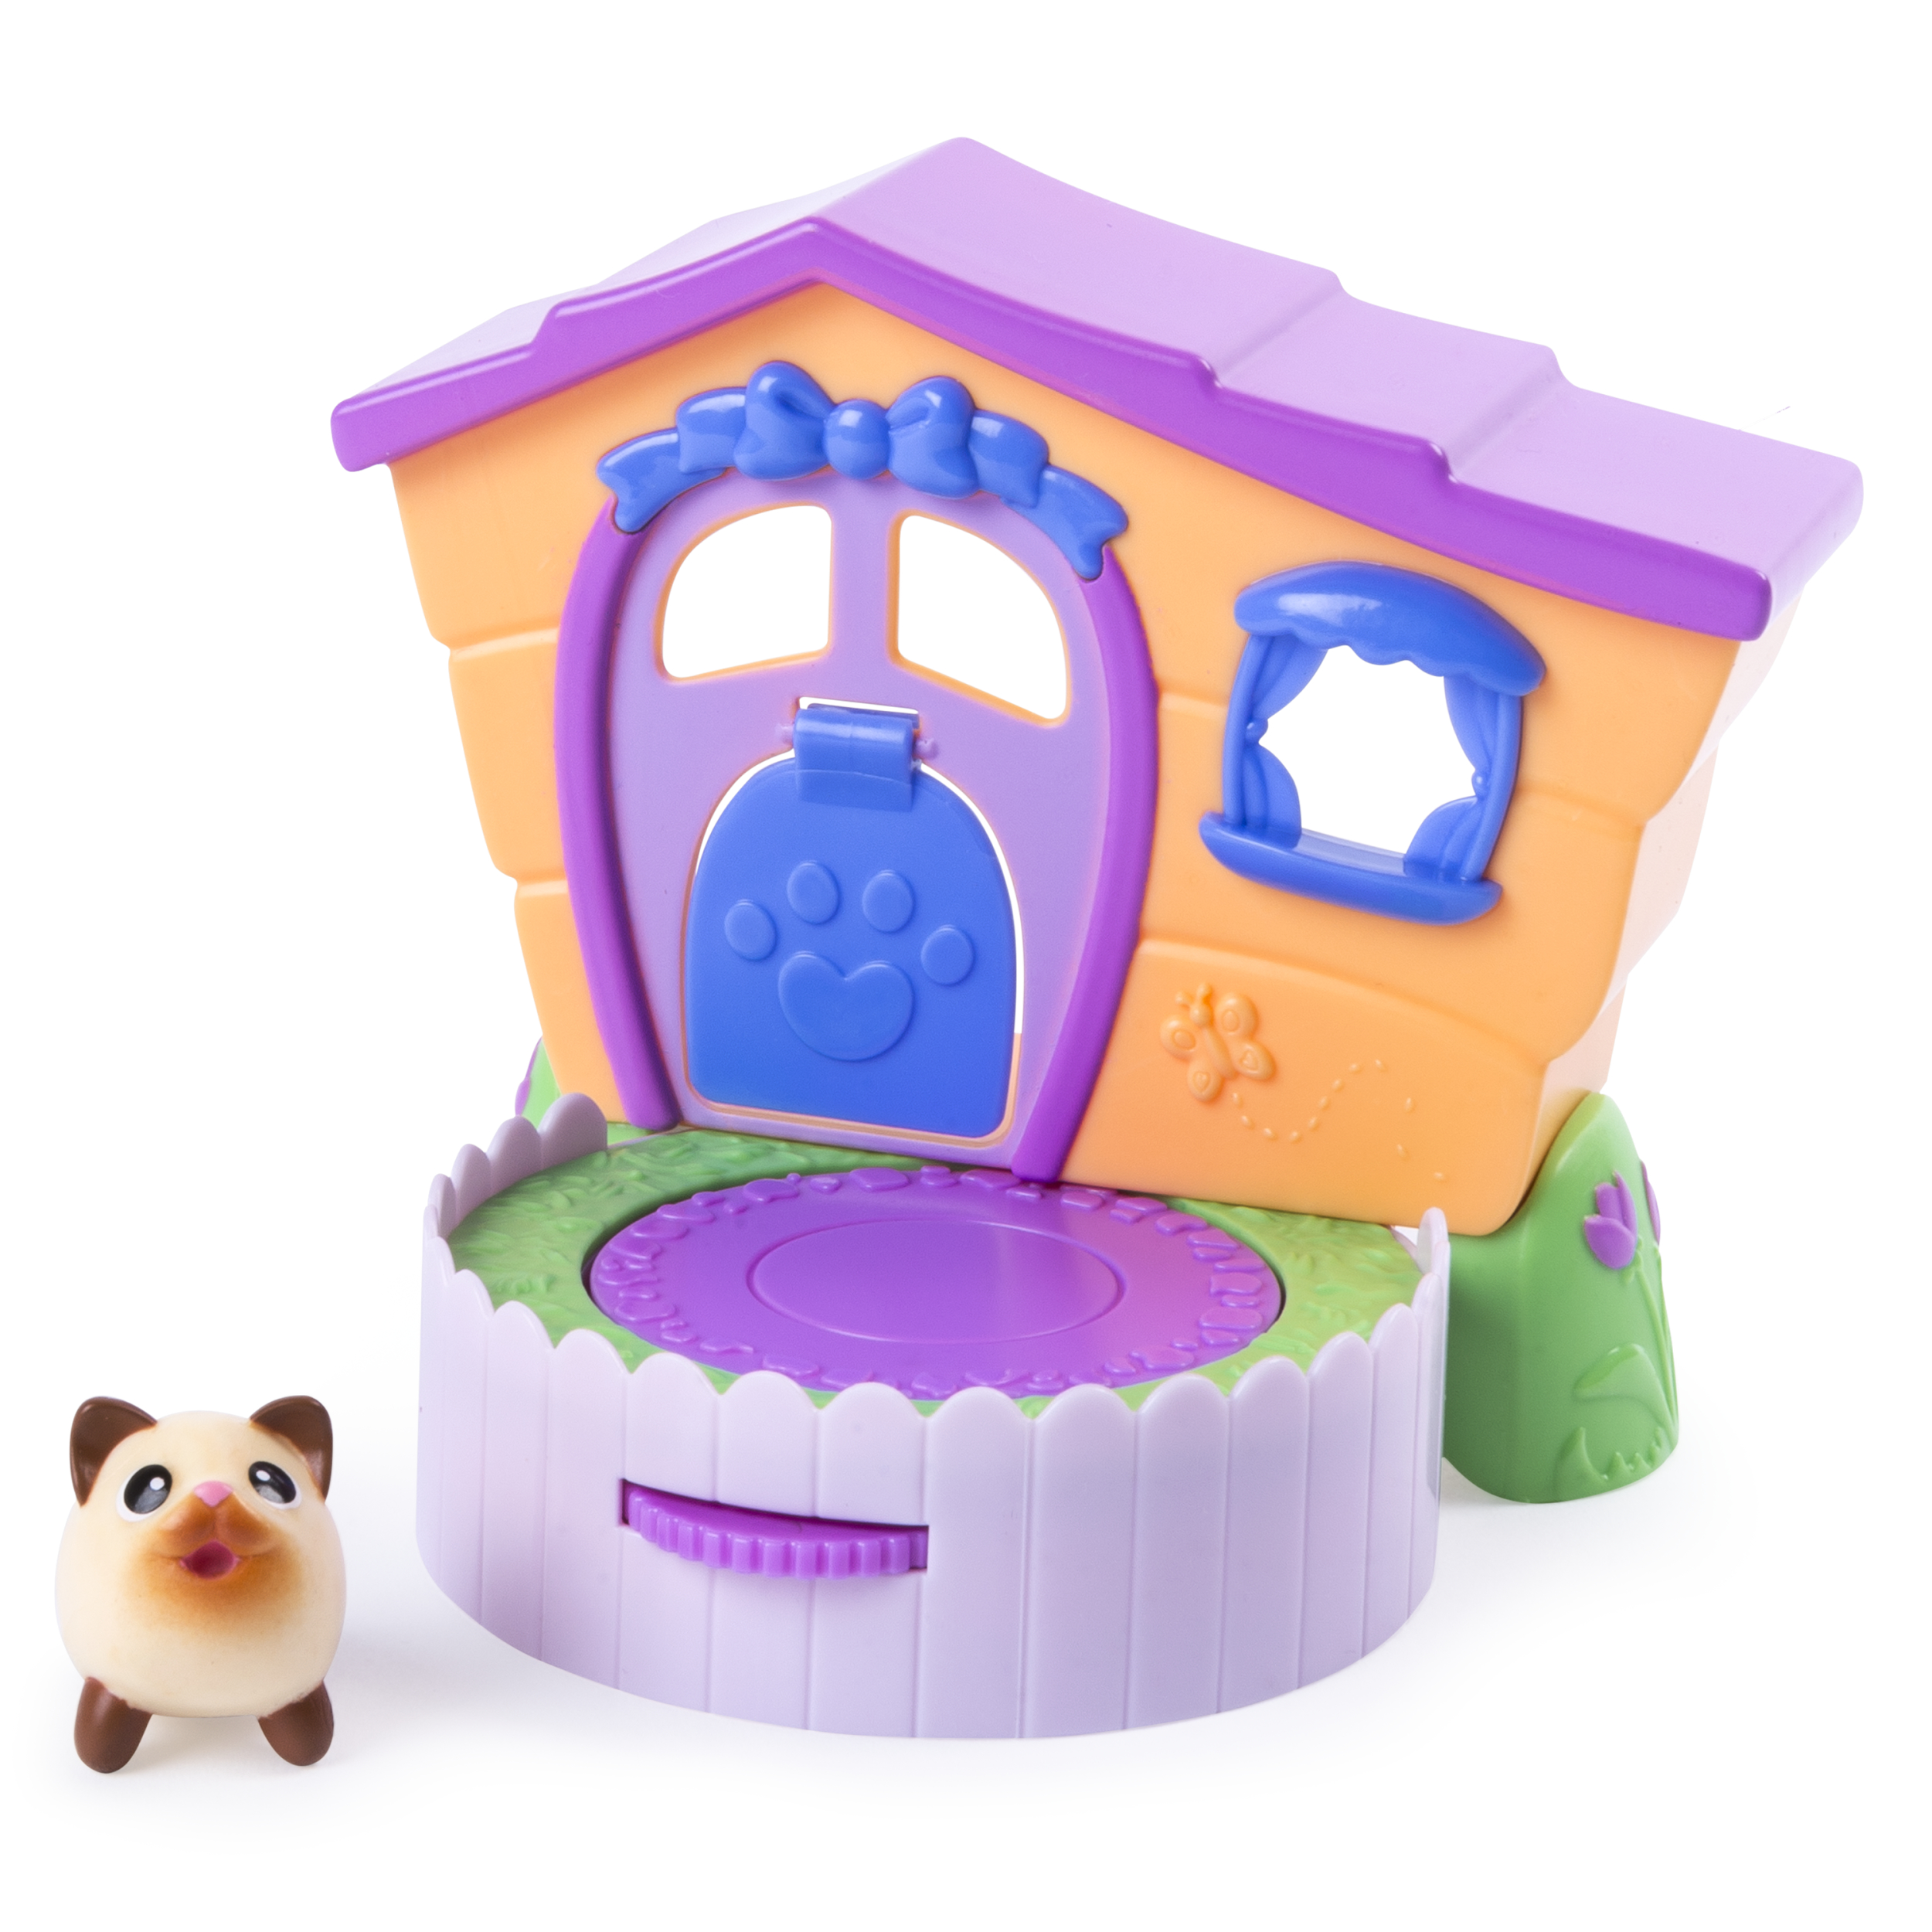 Chubby Puppies & Friends ? 2-in 1 Flip N? Play House Playset with Siamese Kitty Collectible Figure - image 1 of 6